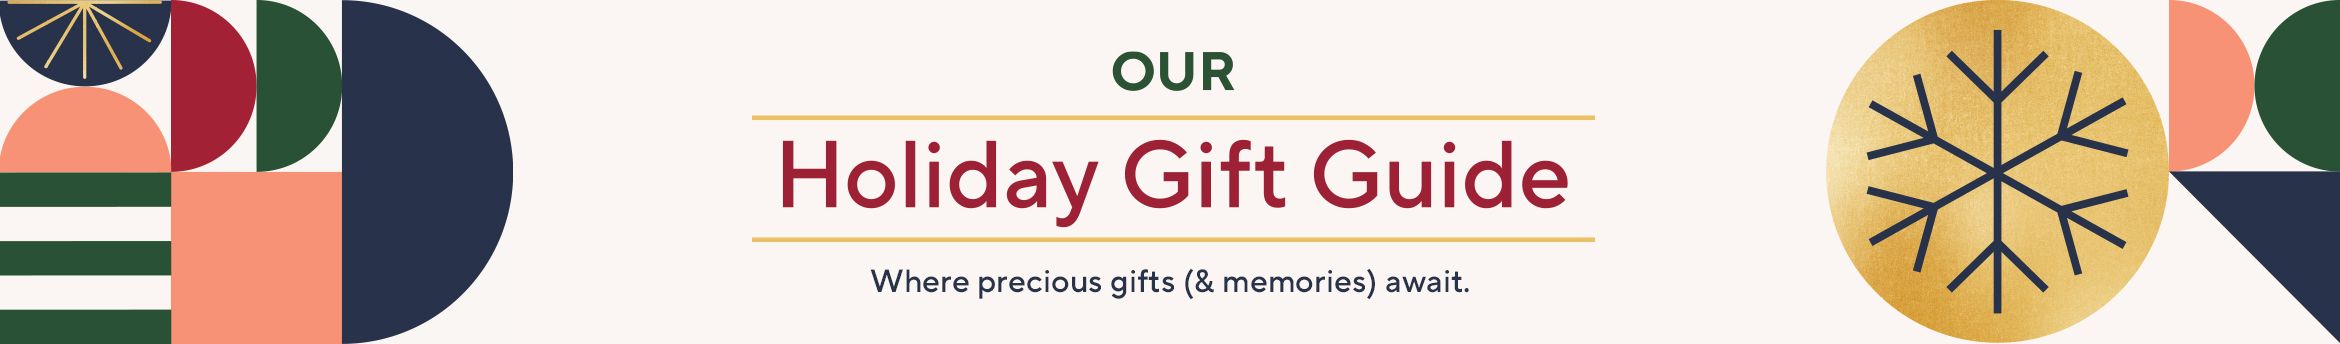 Our Holiday Gift Guide - Where precious gifts (& memories) await. 